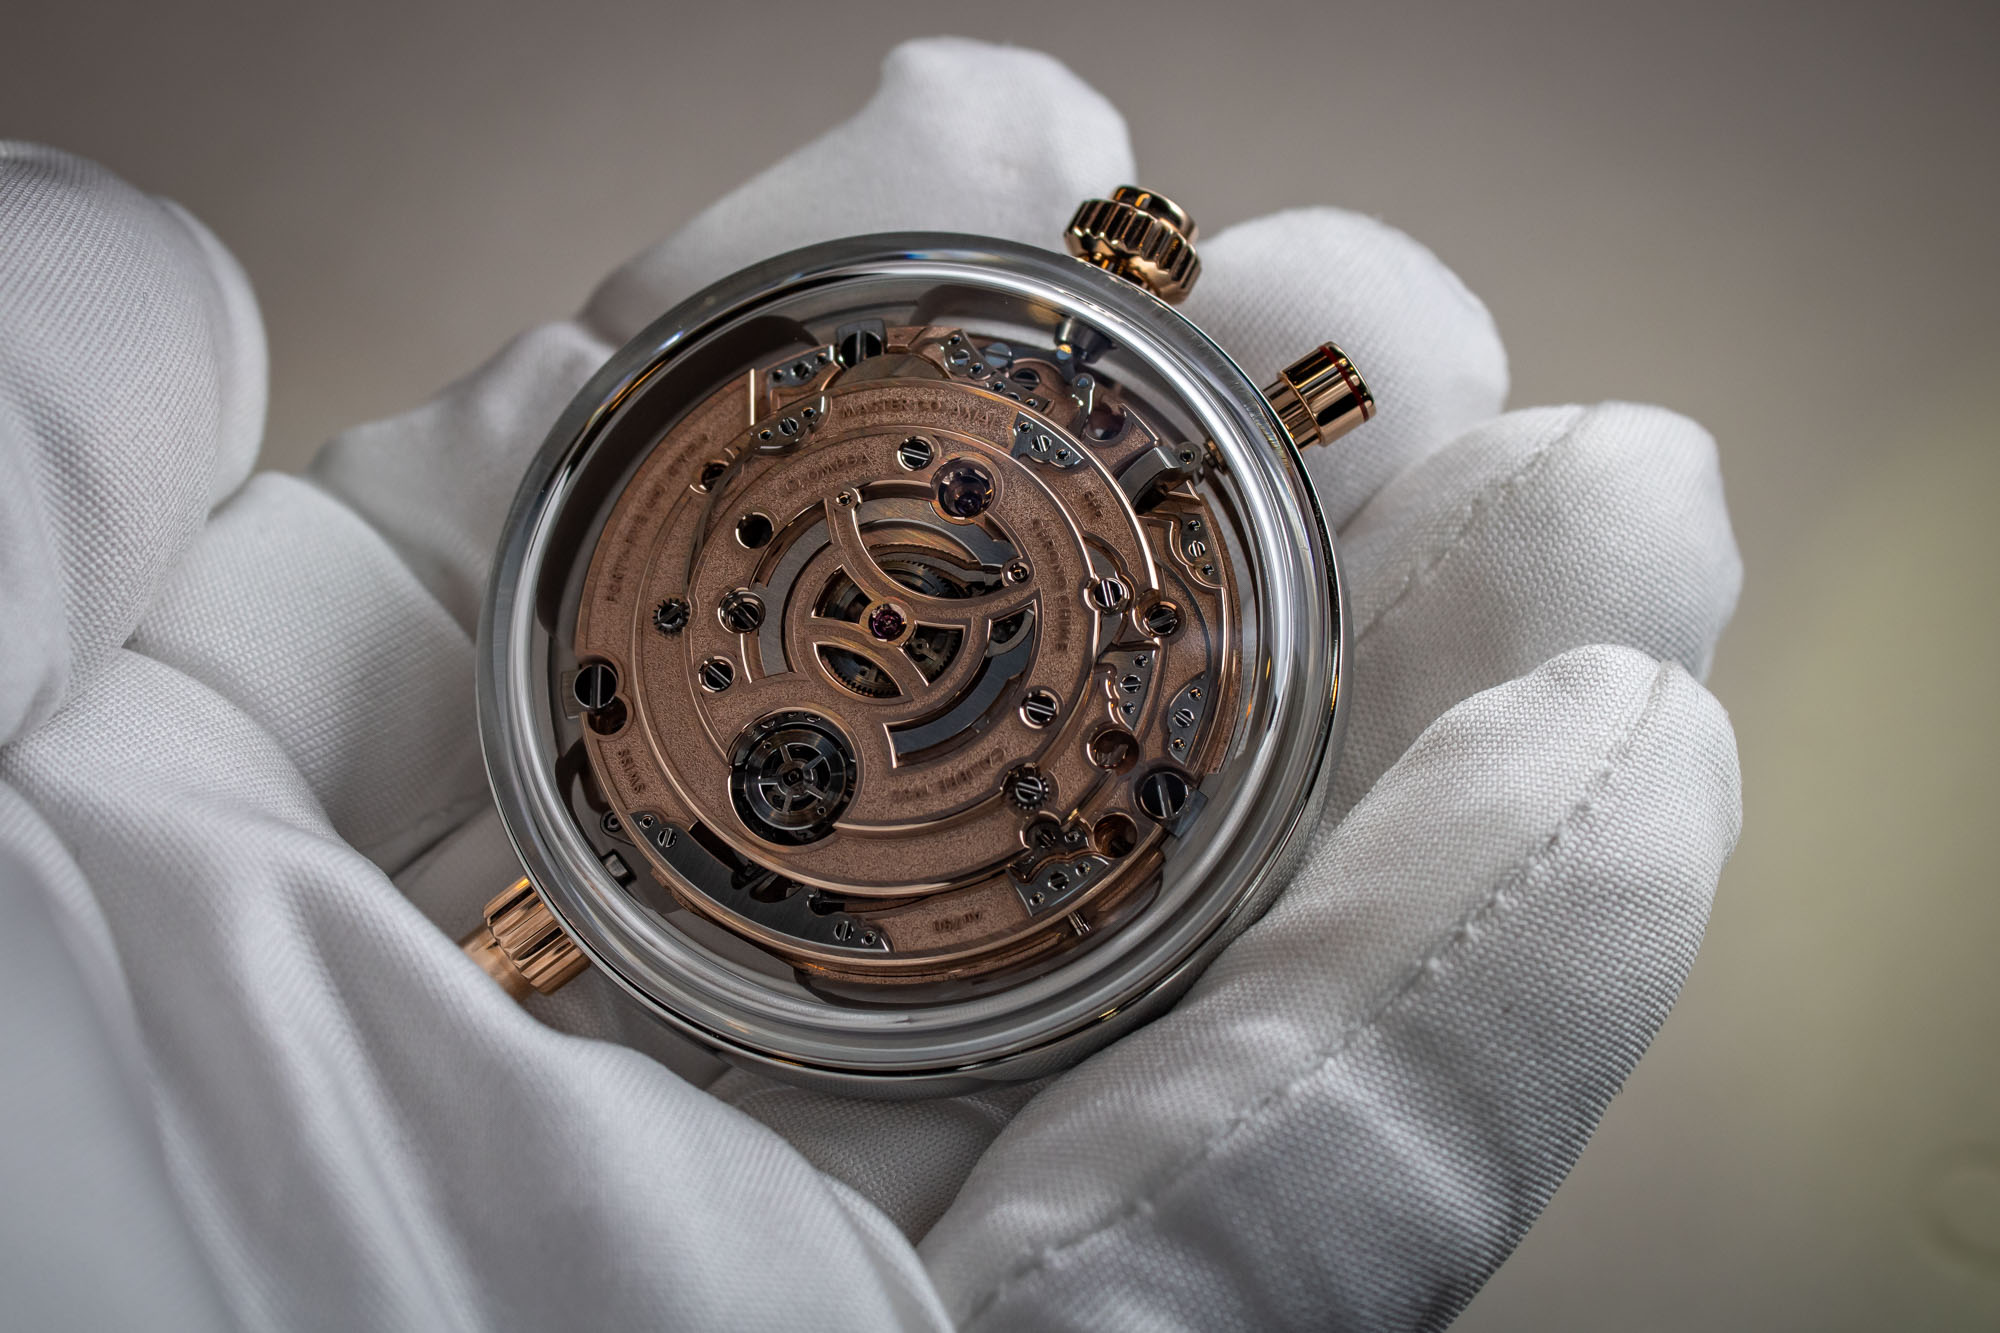 Creating a #Speedmaster Chrono Chime takes experience skill and